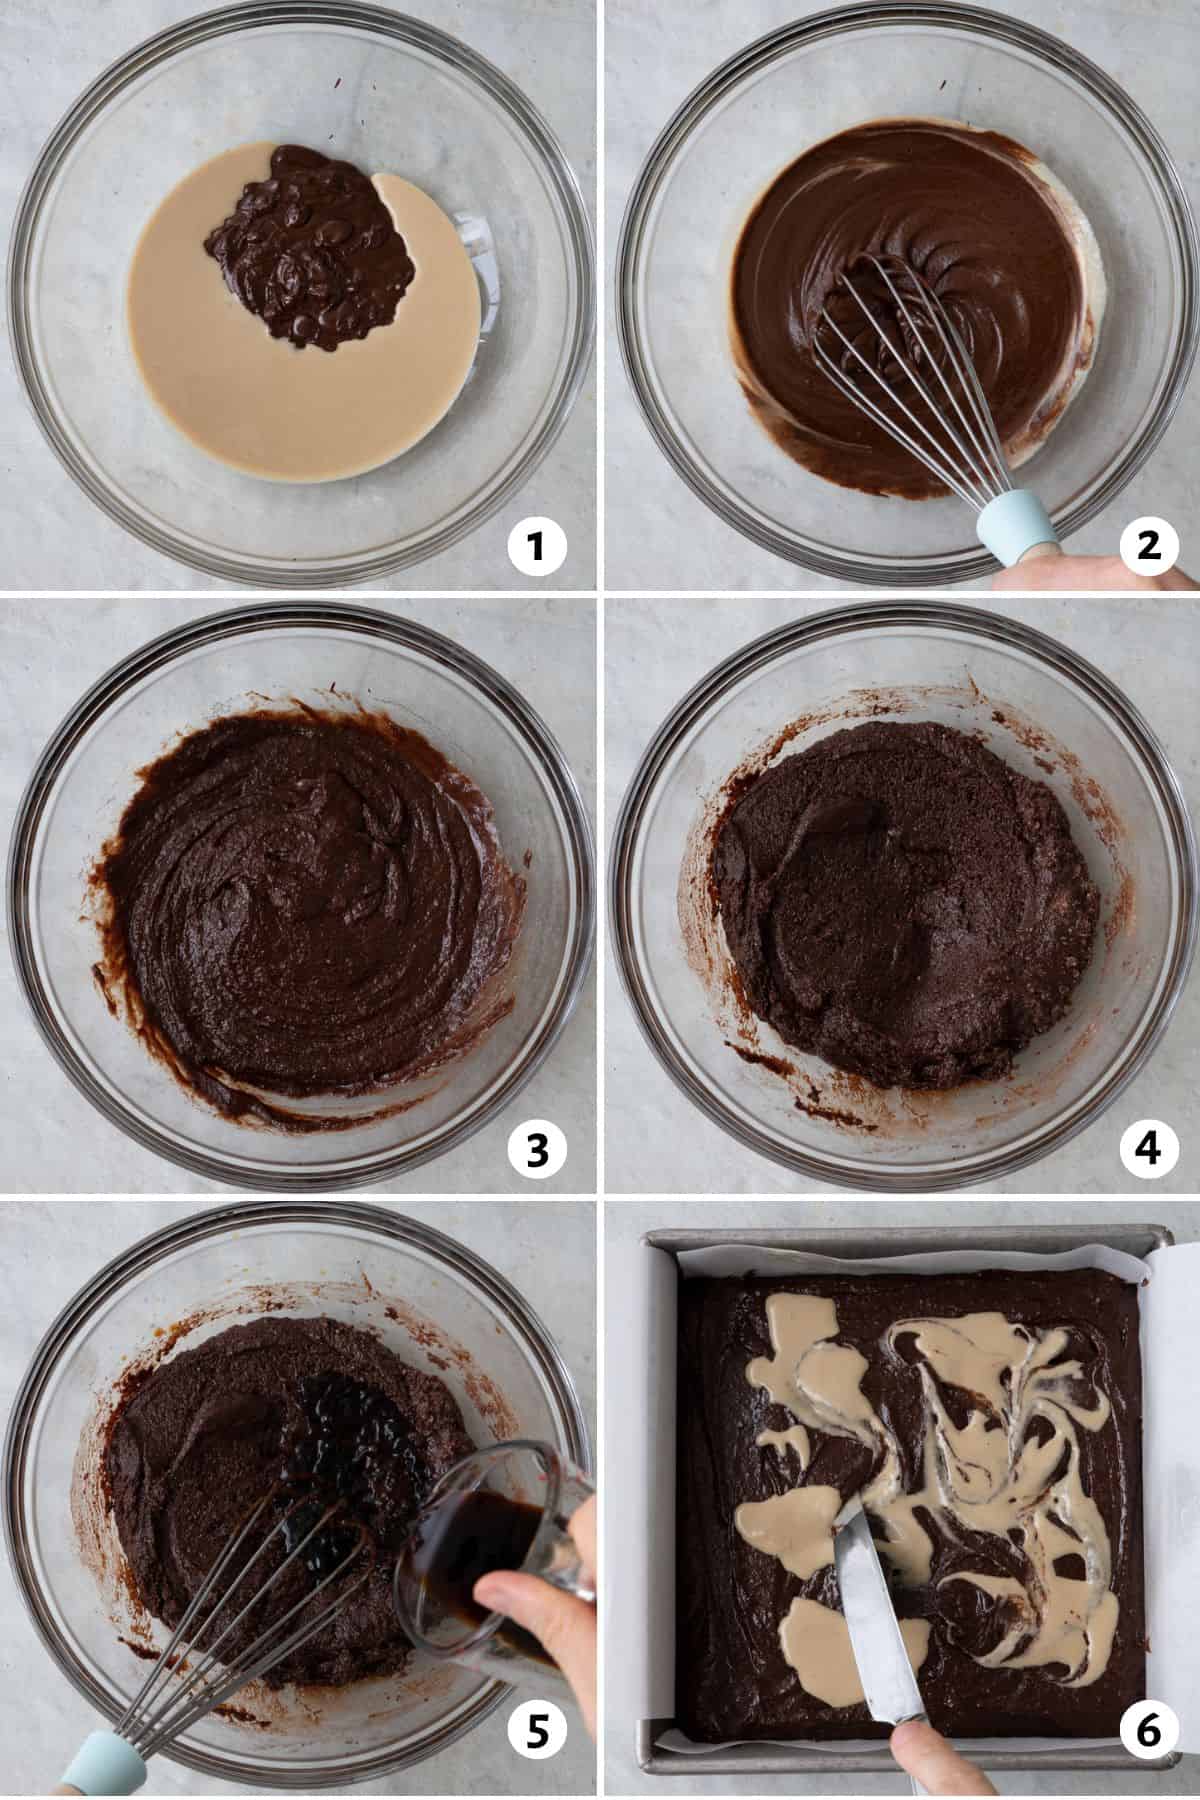 6 image collage mixing batter in one bowl: 1- tahini and melted chocolate chips, 2- whisking until smooth, 3-after sugar, eggs, and vanilla combined, 4- after dry ingredients incorporated, 5- whisking in coffee, and 6- batter in baking pan with a knife swirling in tahini.